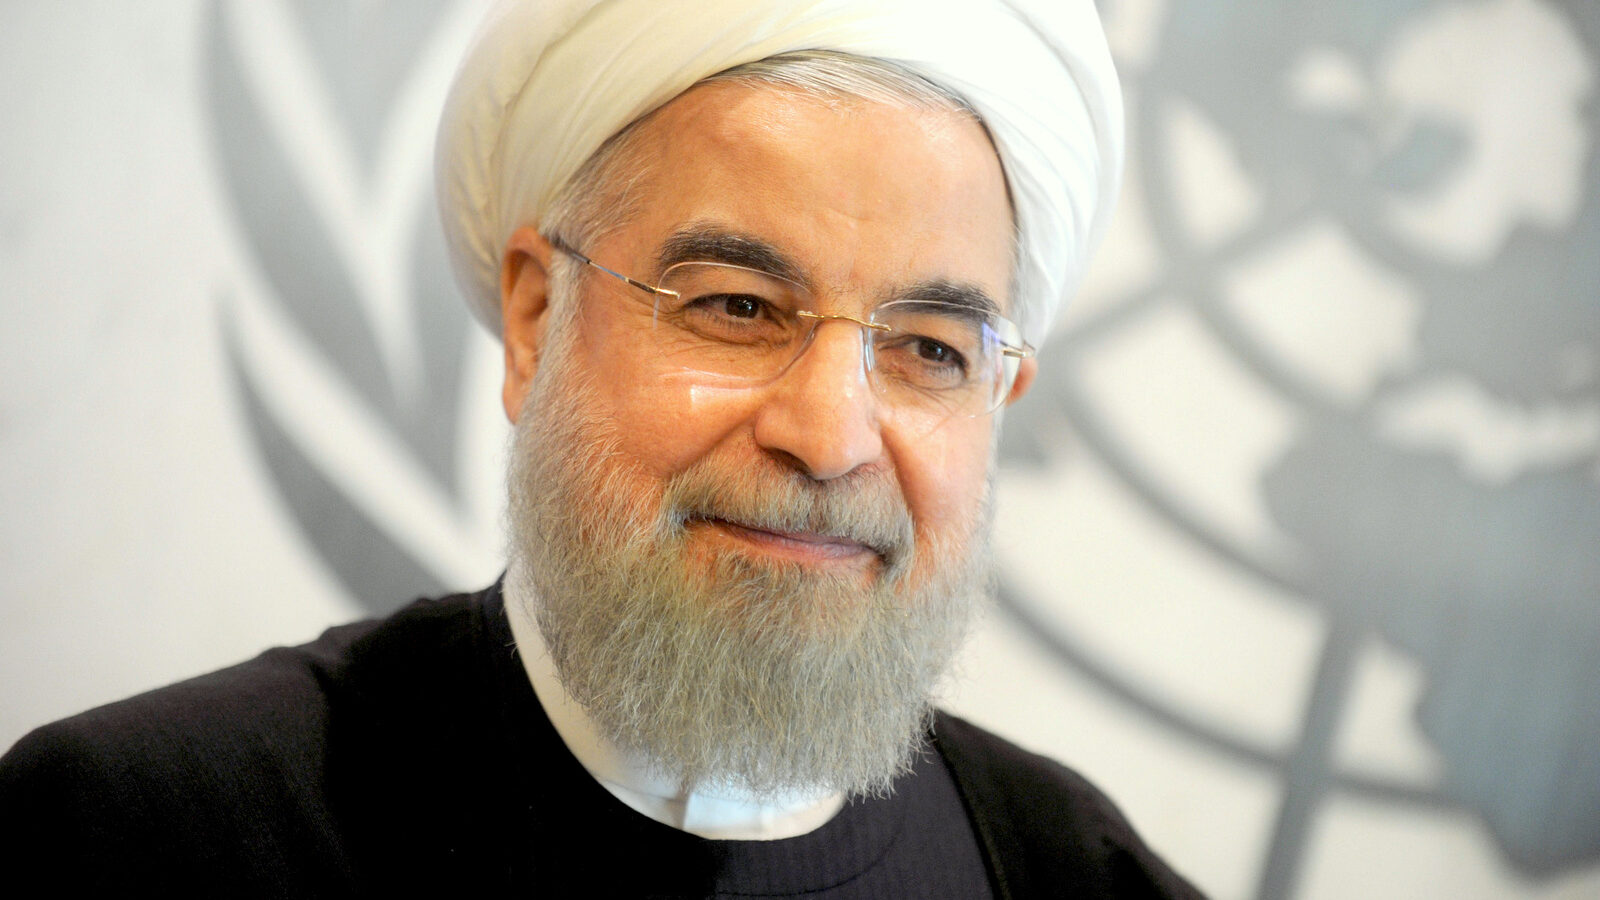 President Rouhani said a Saudi-led coalition that has been bombing Yemen since March has prompted a humanitarian crisis and is main cause behind the spread of extremism in the region. (Photo by: Dennis Van Tine/STAR MAX/IPx)